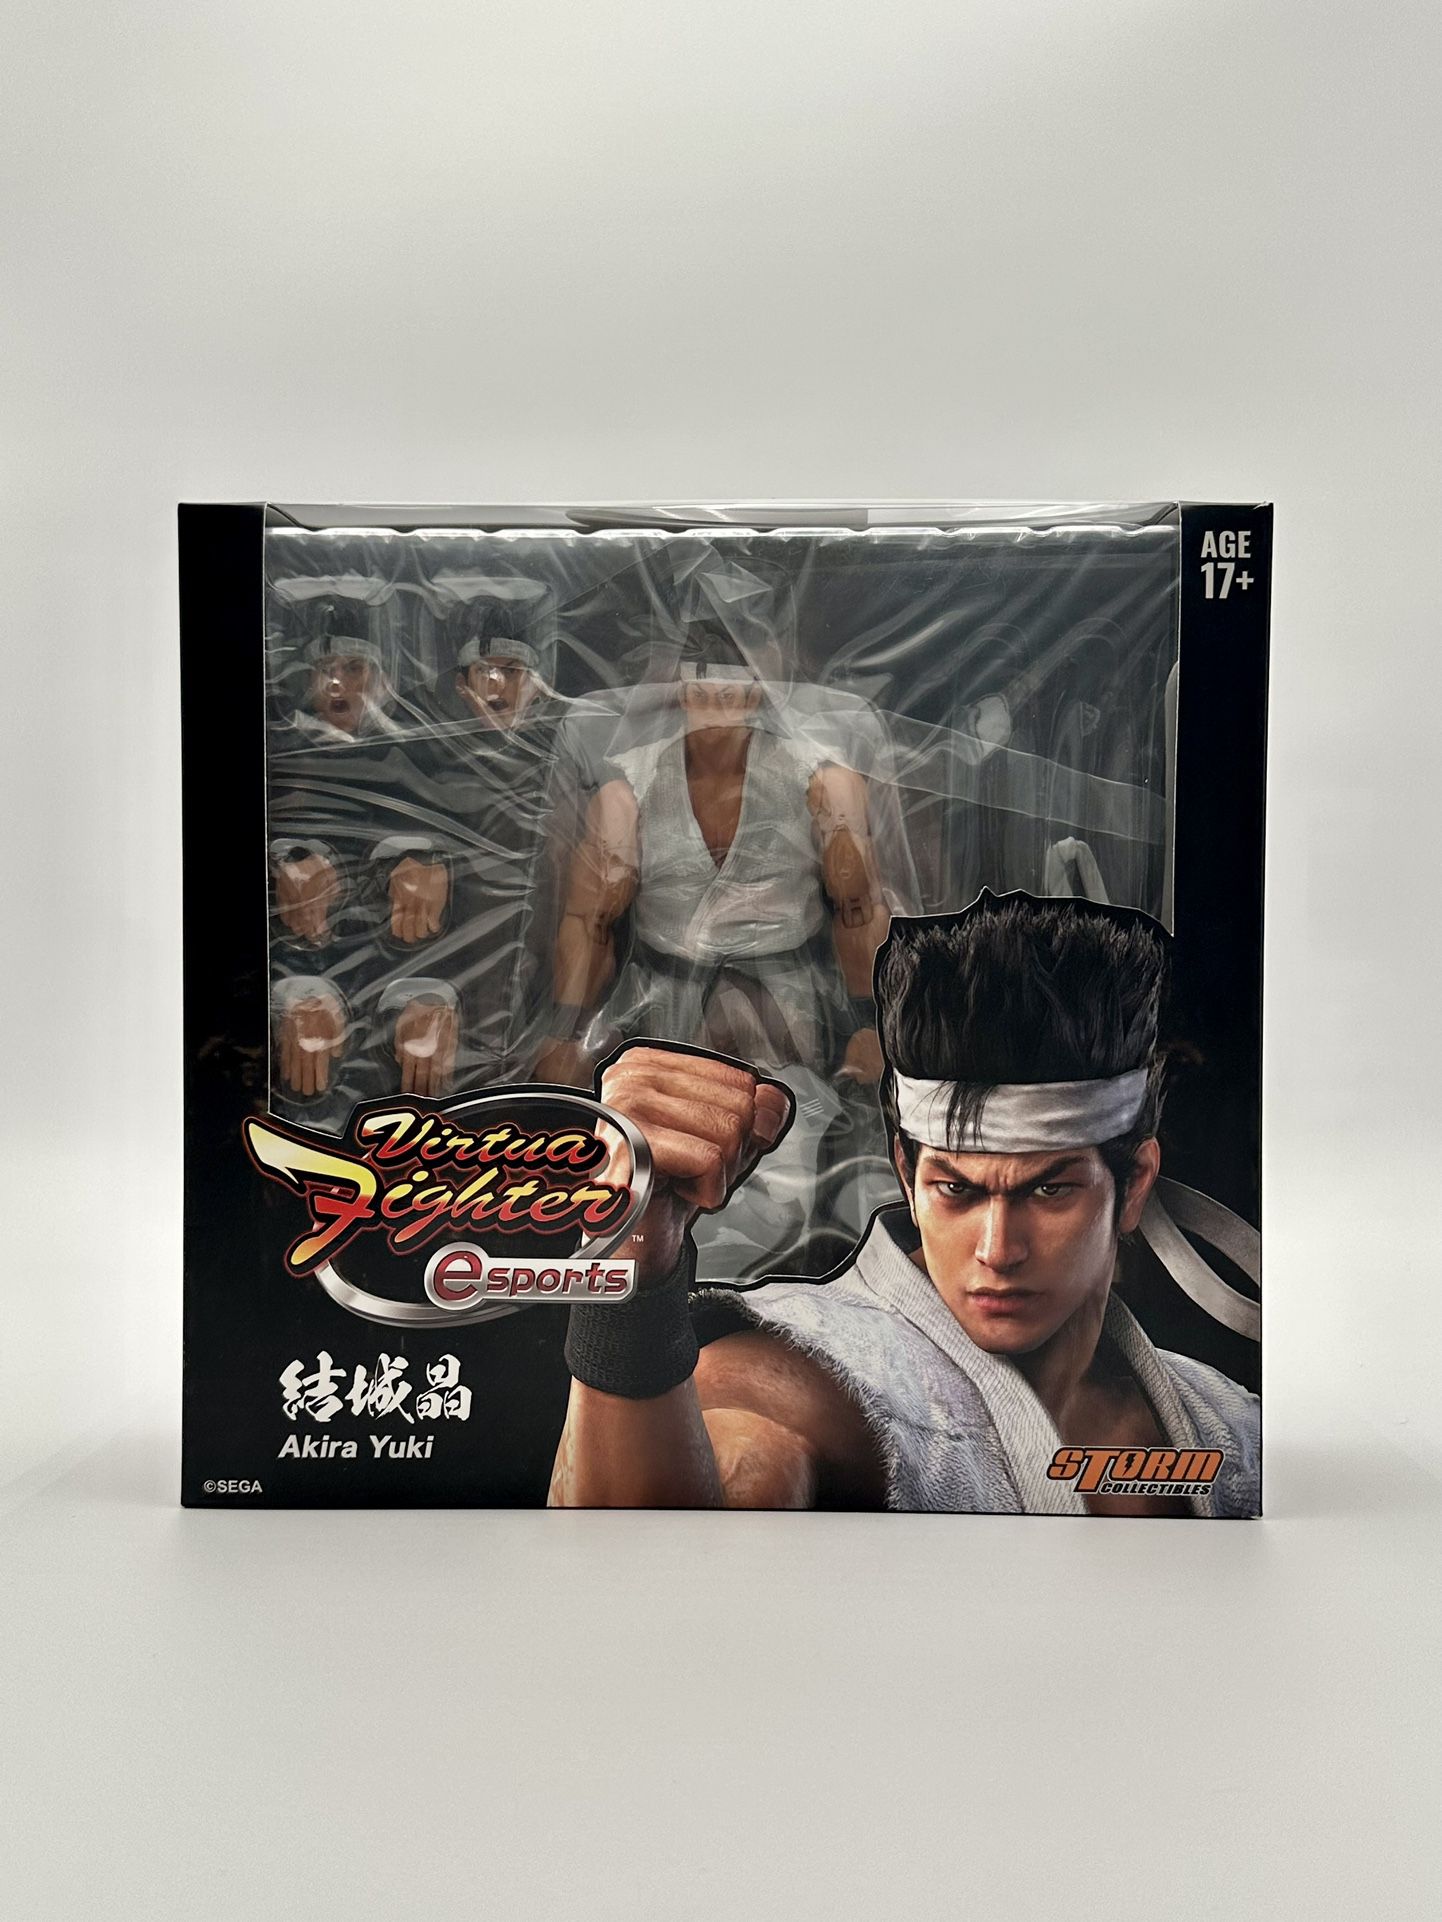 Akira Yuki - Storm Collectibles 1/12 Scale Figure from Virtua Fighter 5